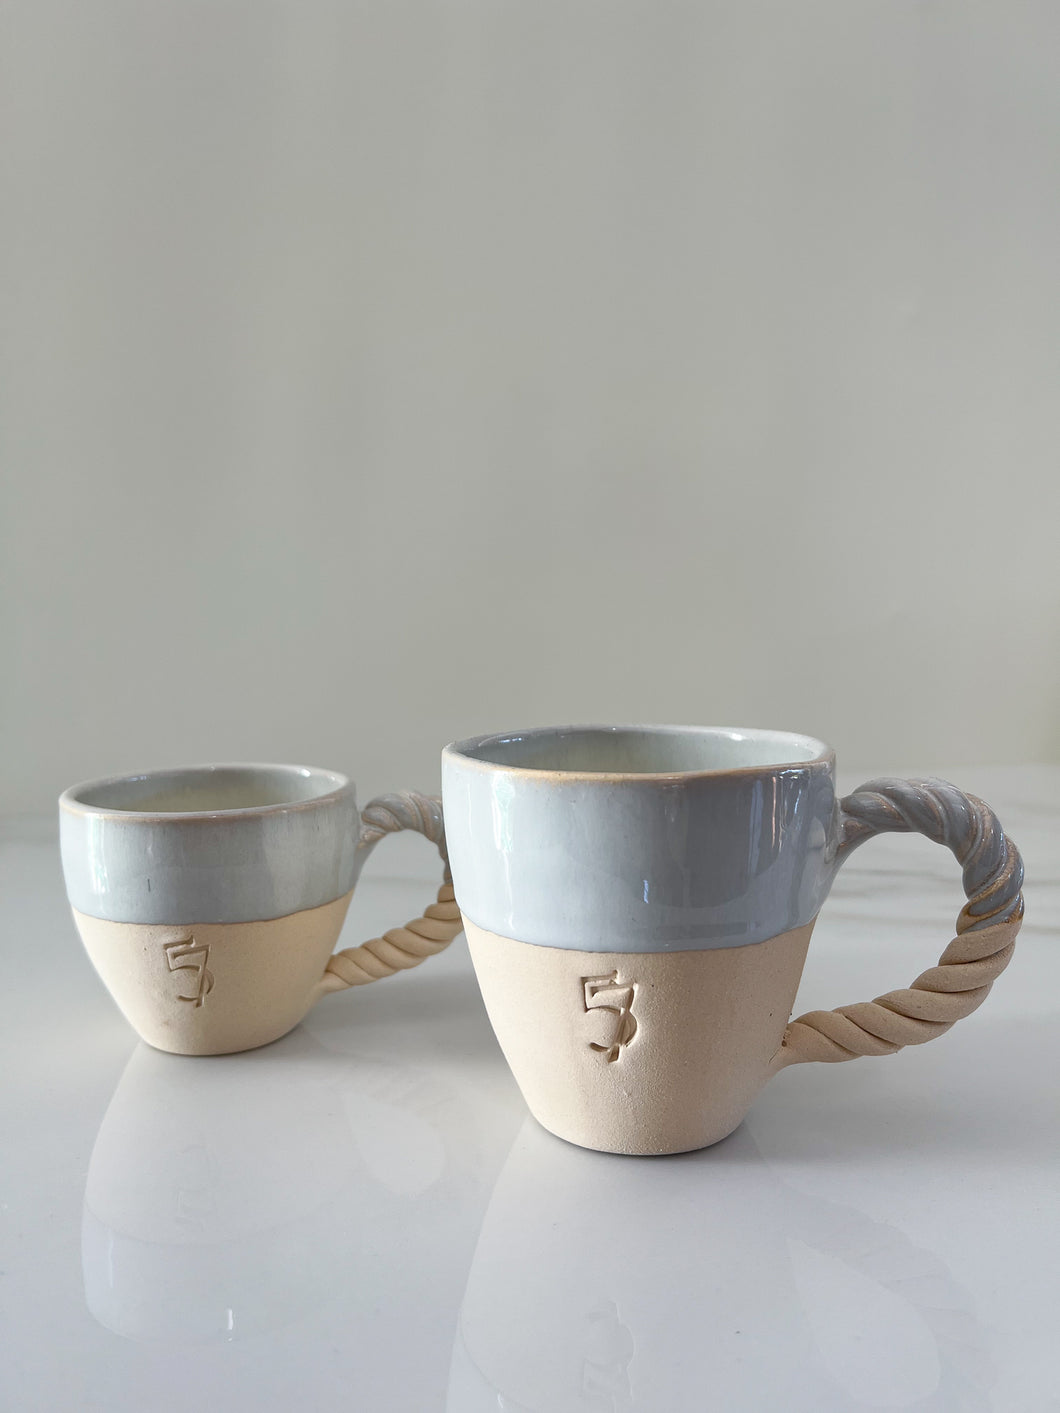 LITTLE PRINCE CAPPUCCINO CUP 250ml